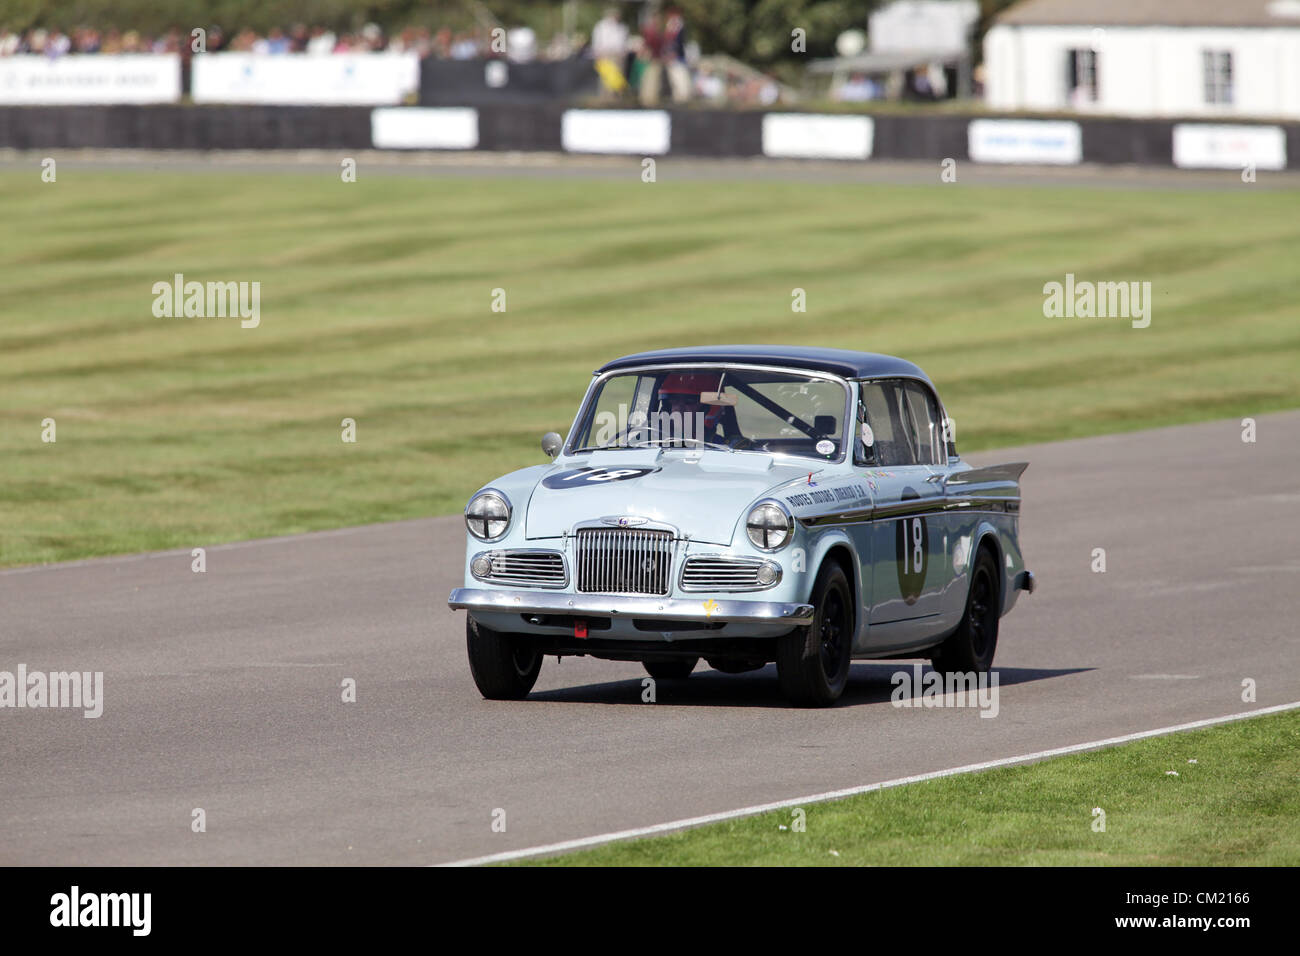 Goodwood Estate, Chichester, UK. 15th September 2012. Martin Donnelly driving a Sunbeam Rapier during the St Mary's Trophy at the Goodwood Revival. The revival is a 'magical step back in time', showcasing a mixture of cars and aviation from the 40's, 50's and 60's and is one of the most popular historical motor racing events in the world. For more information visit www.goodwood.co.uk/revival. Stock Photo